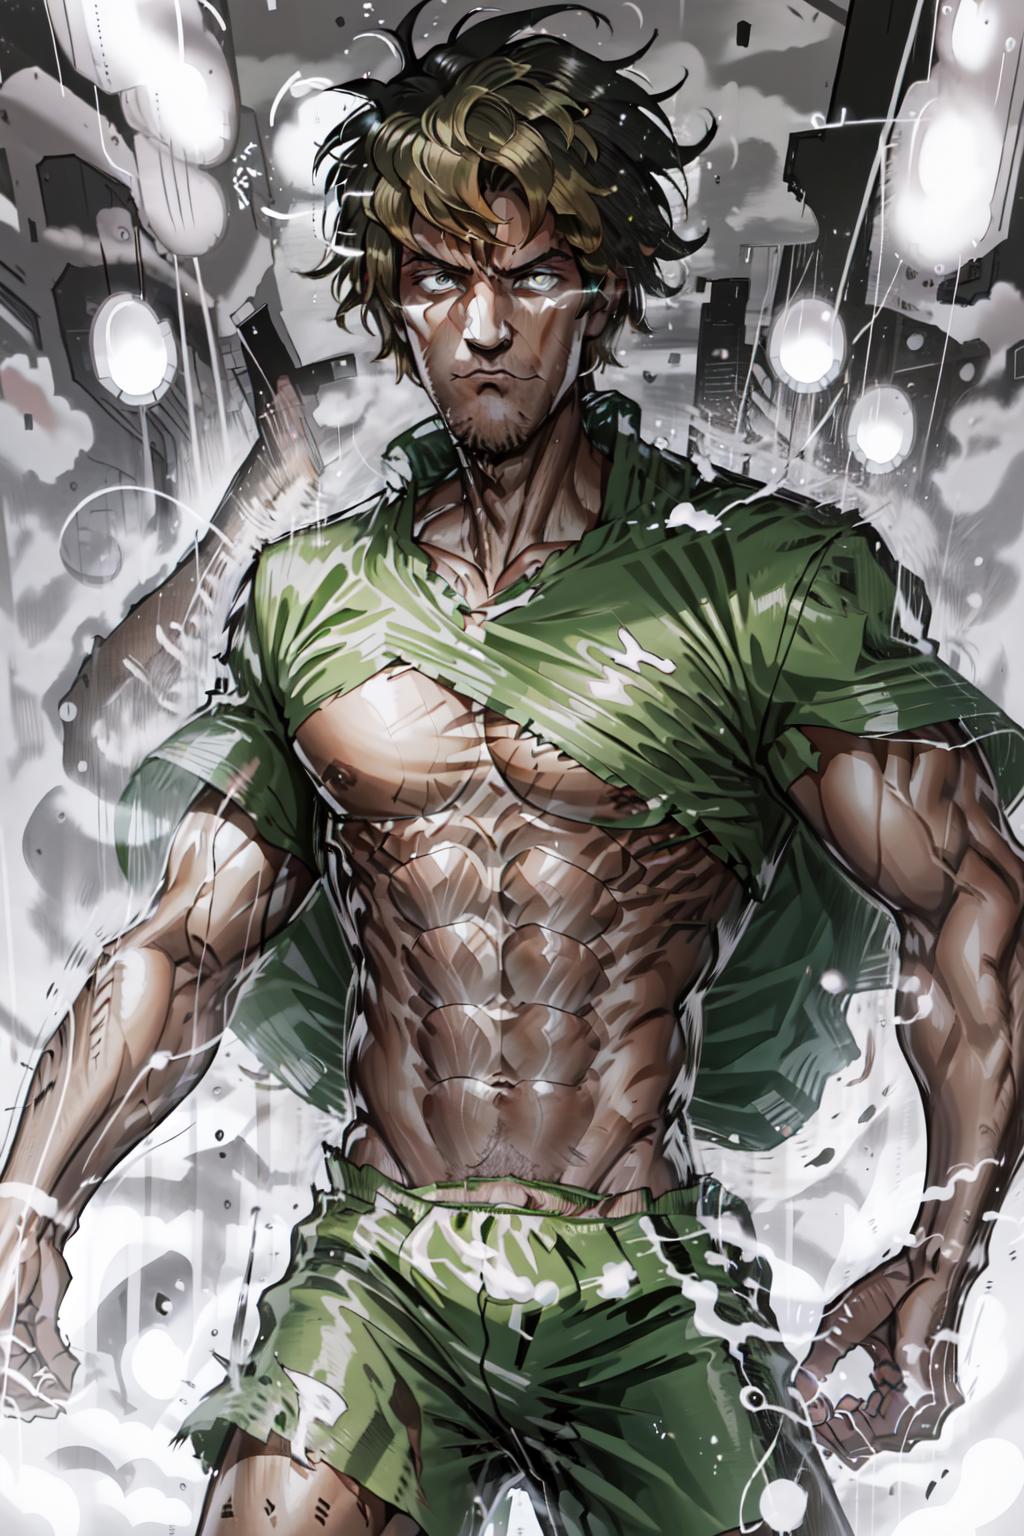 A muscular man in a green shirt and green shorts with his shirt ripped open.